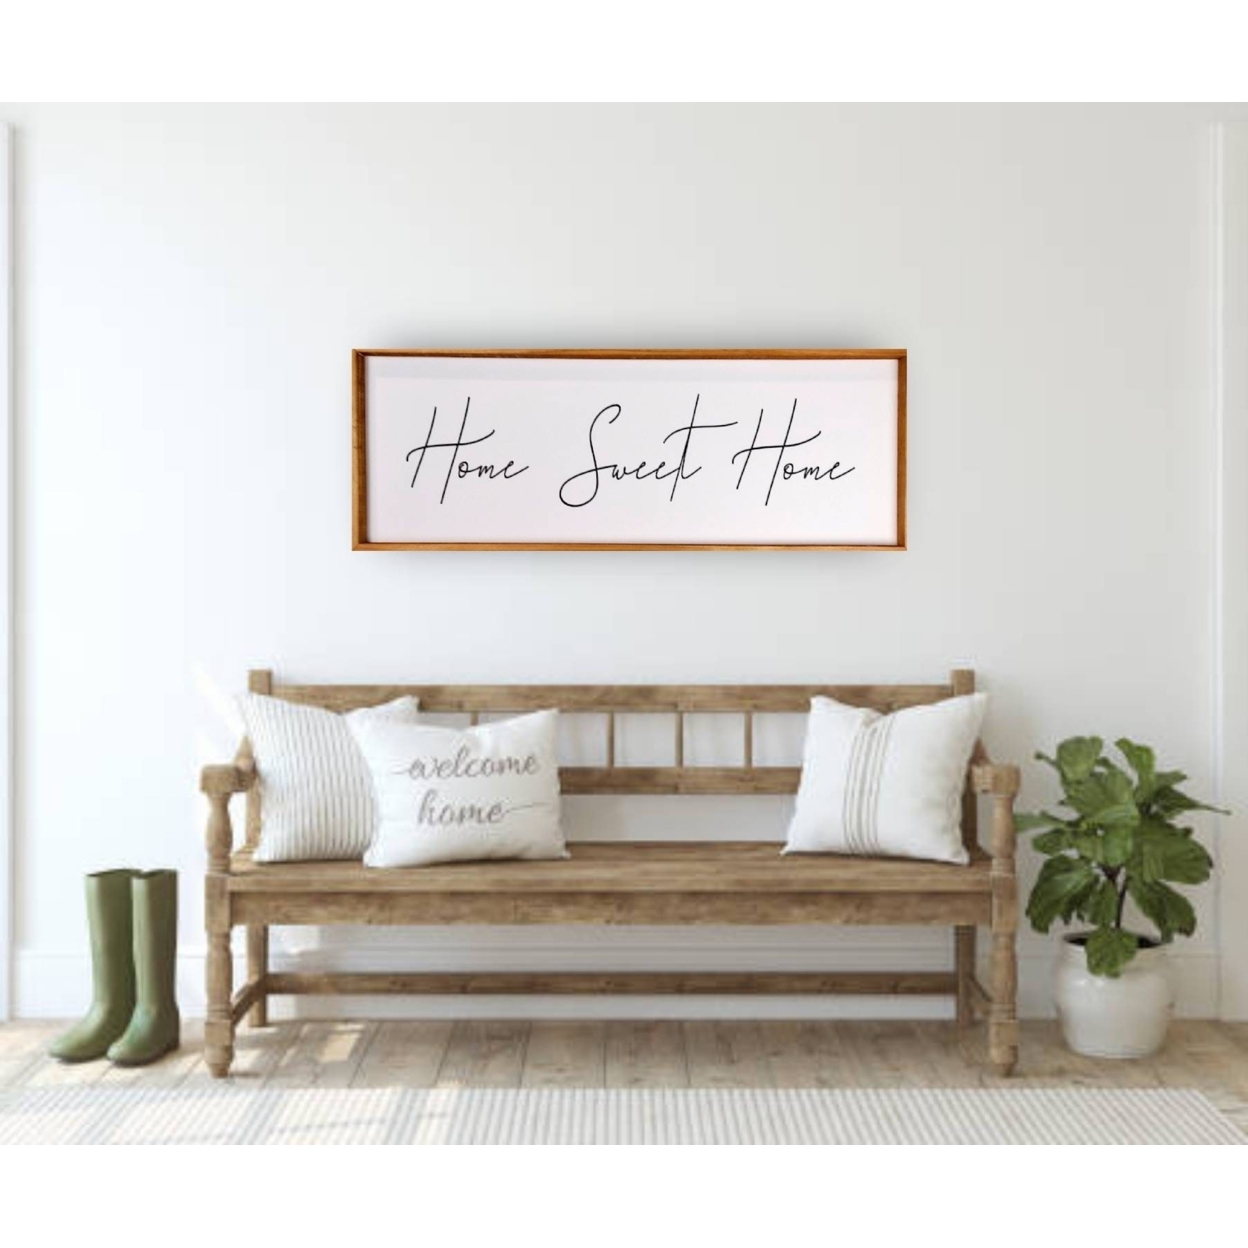 Home Sweet Home Sign - Canvas Wall Sign - Farmhouse Decor - Funny Sign - Rustic Decor - Canvas Wall Art - Framed Sign - Home Sign - Gray - grey